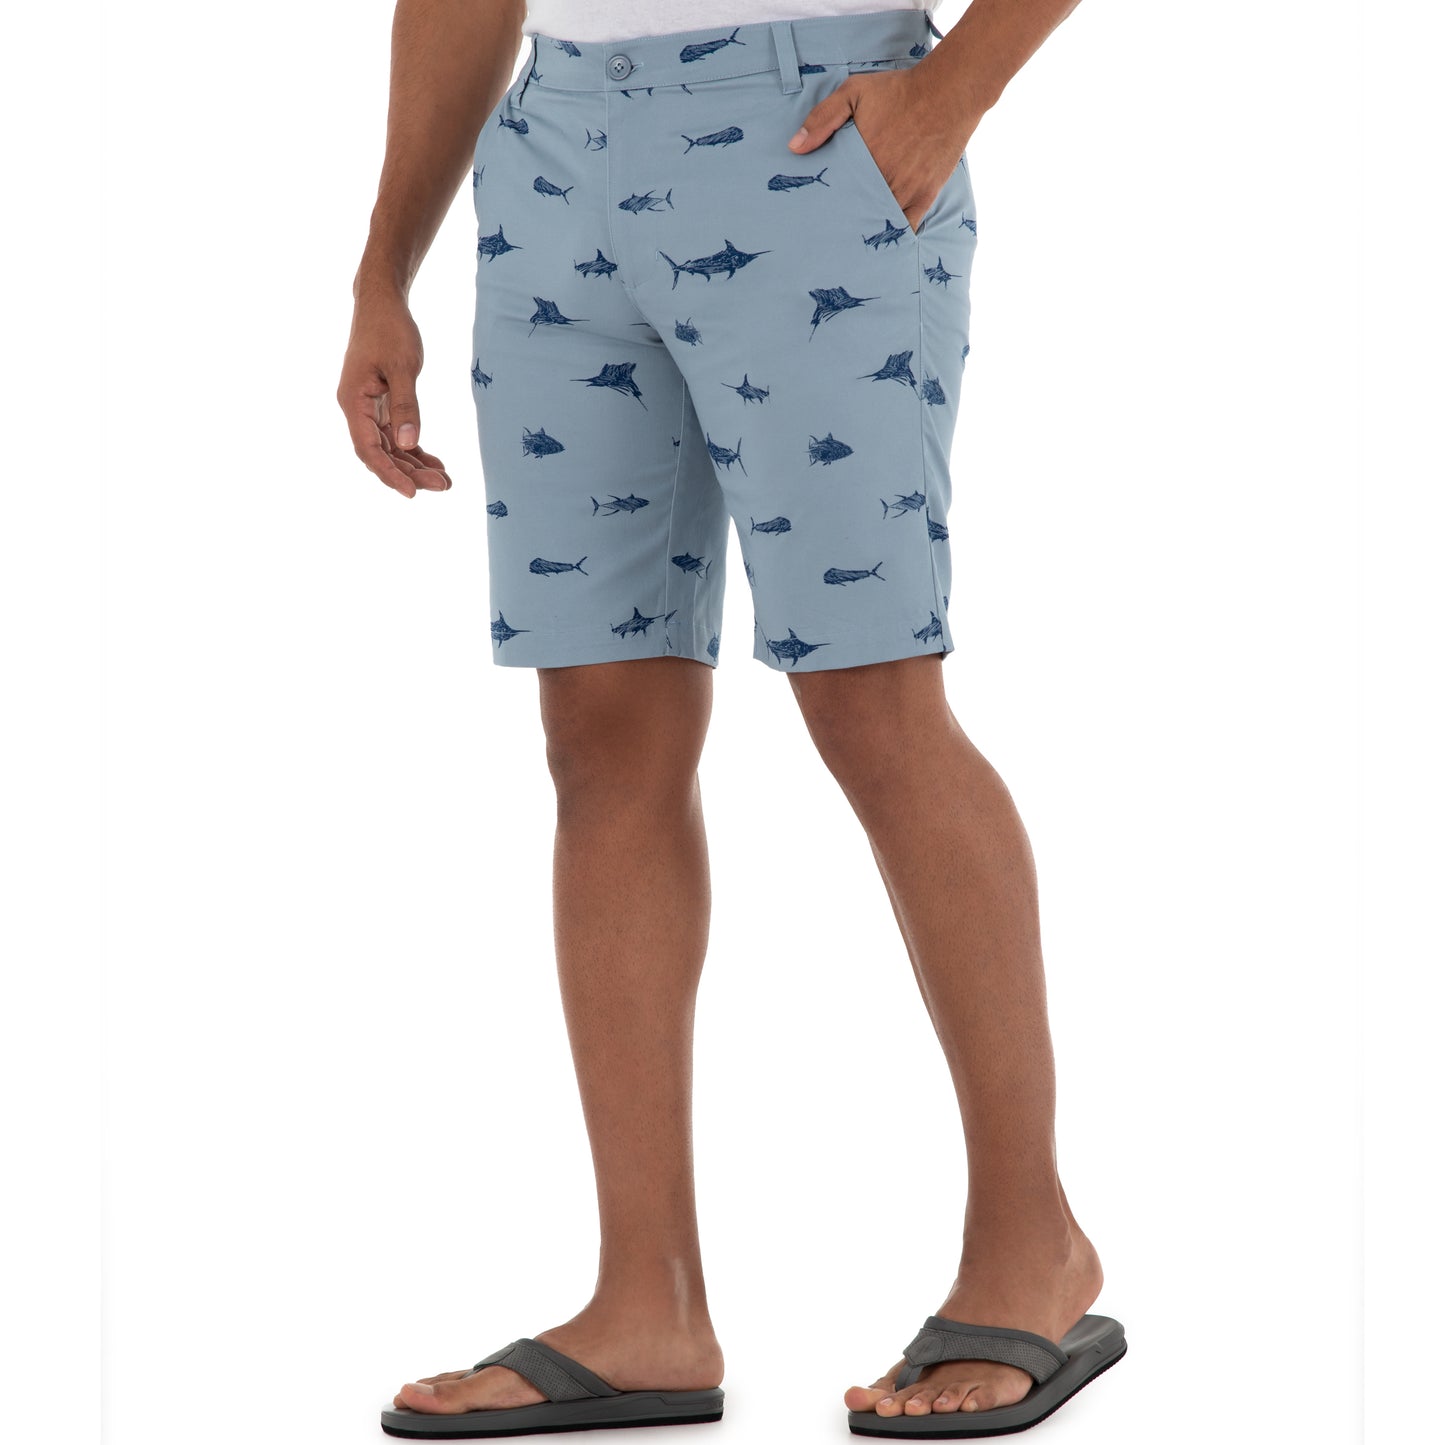 Men's 9" Performance Printed Blue Woven Short View 2